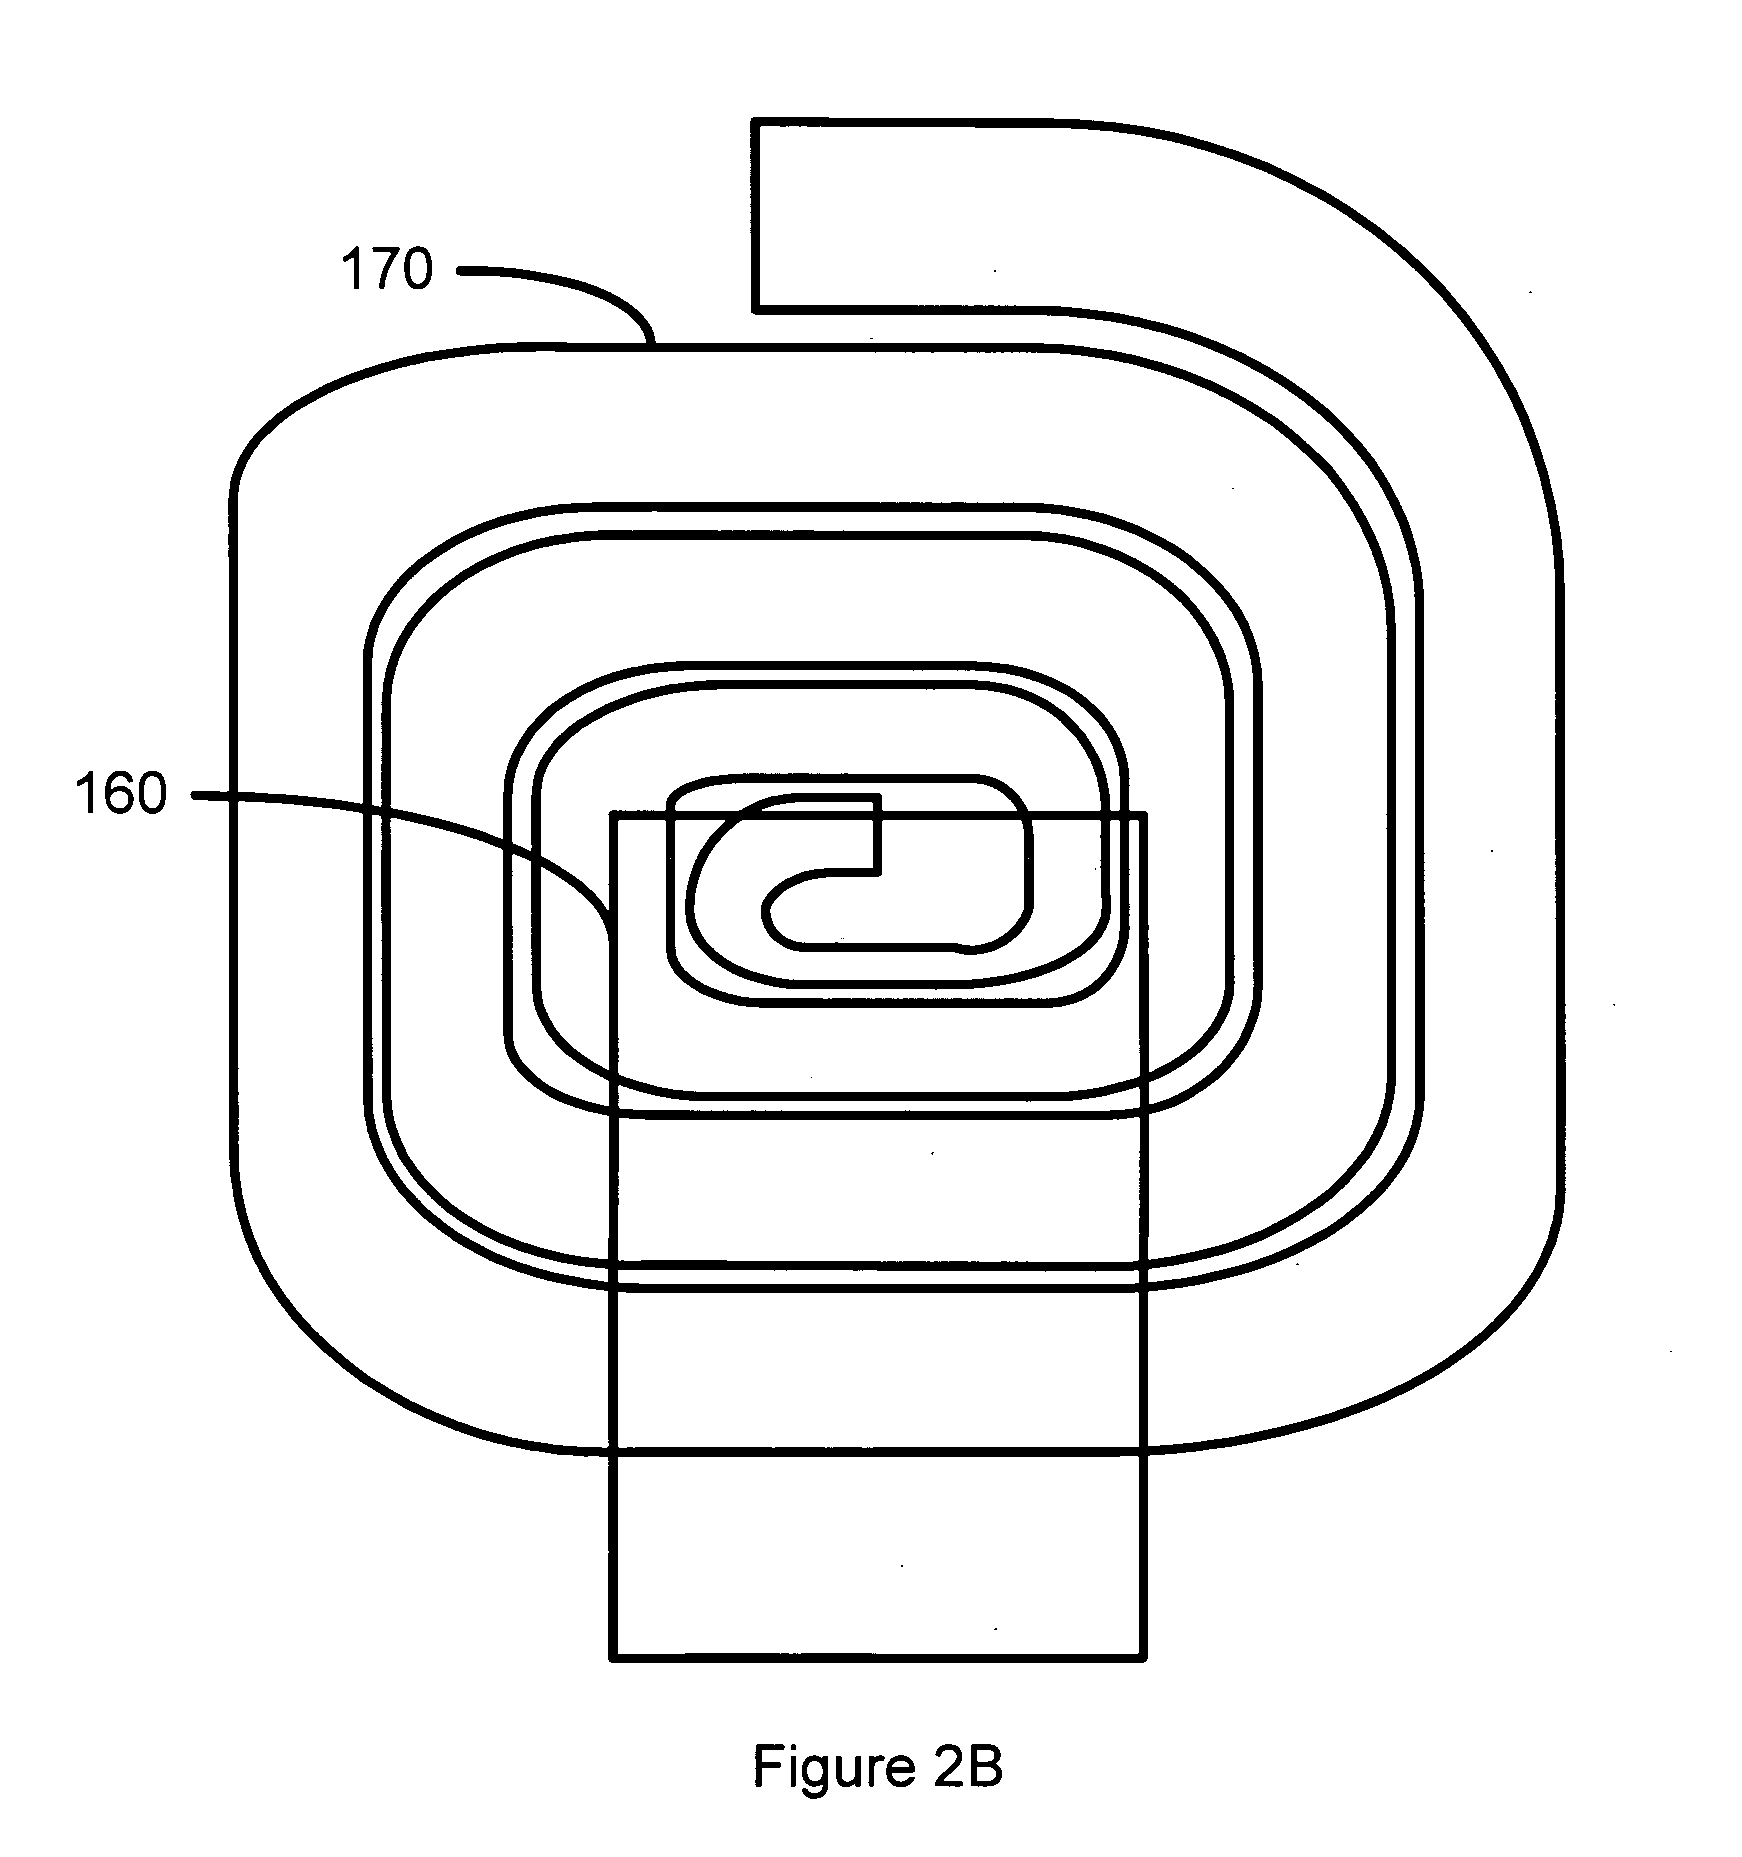 Method and system for providing dynamic actuation of a write head using a strain element